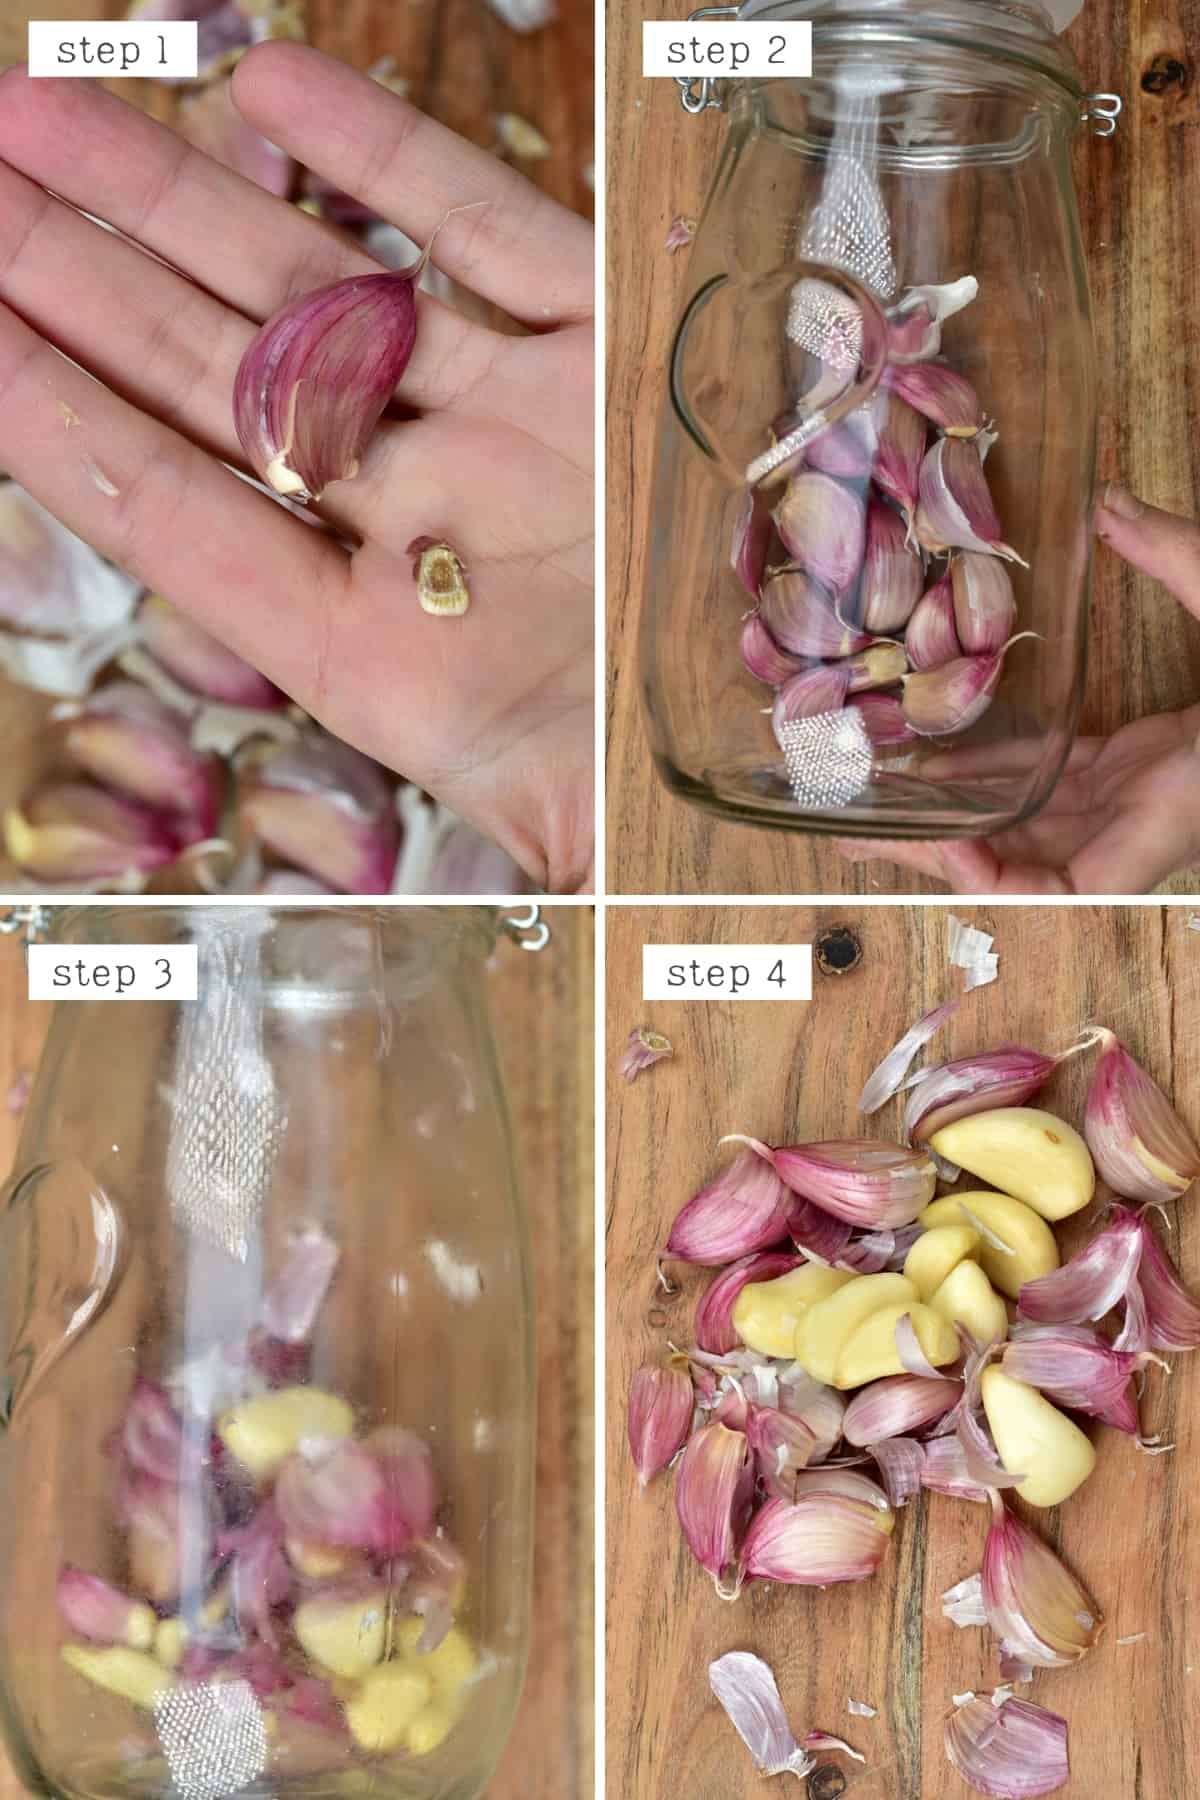 How to peel garlic - Method 4 with a jar